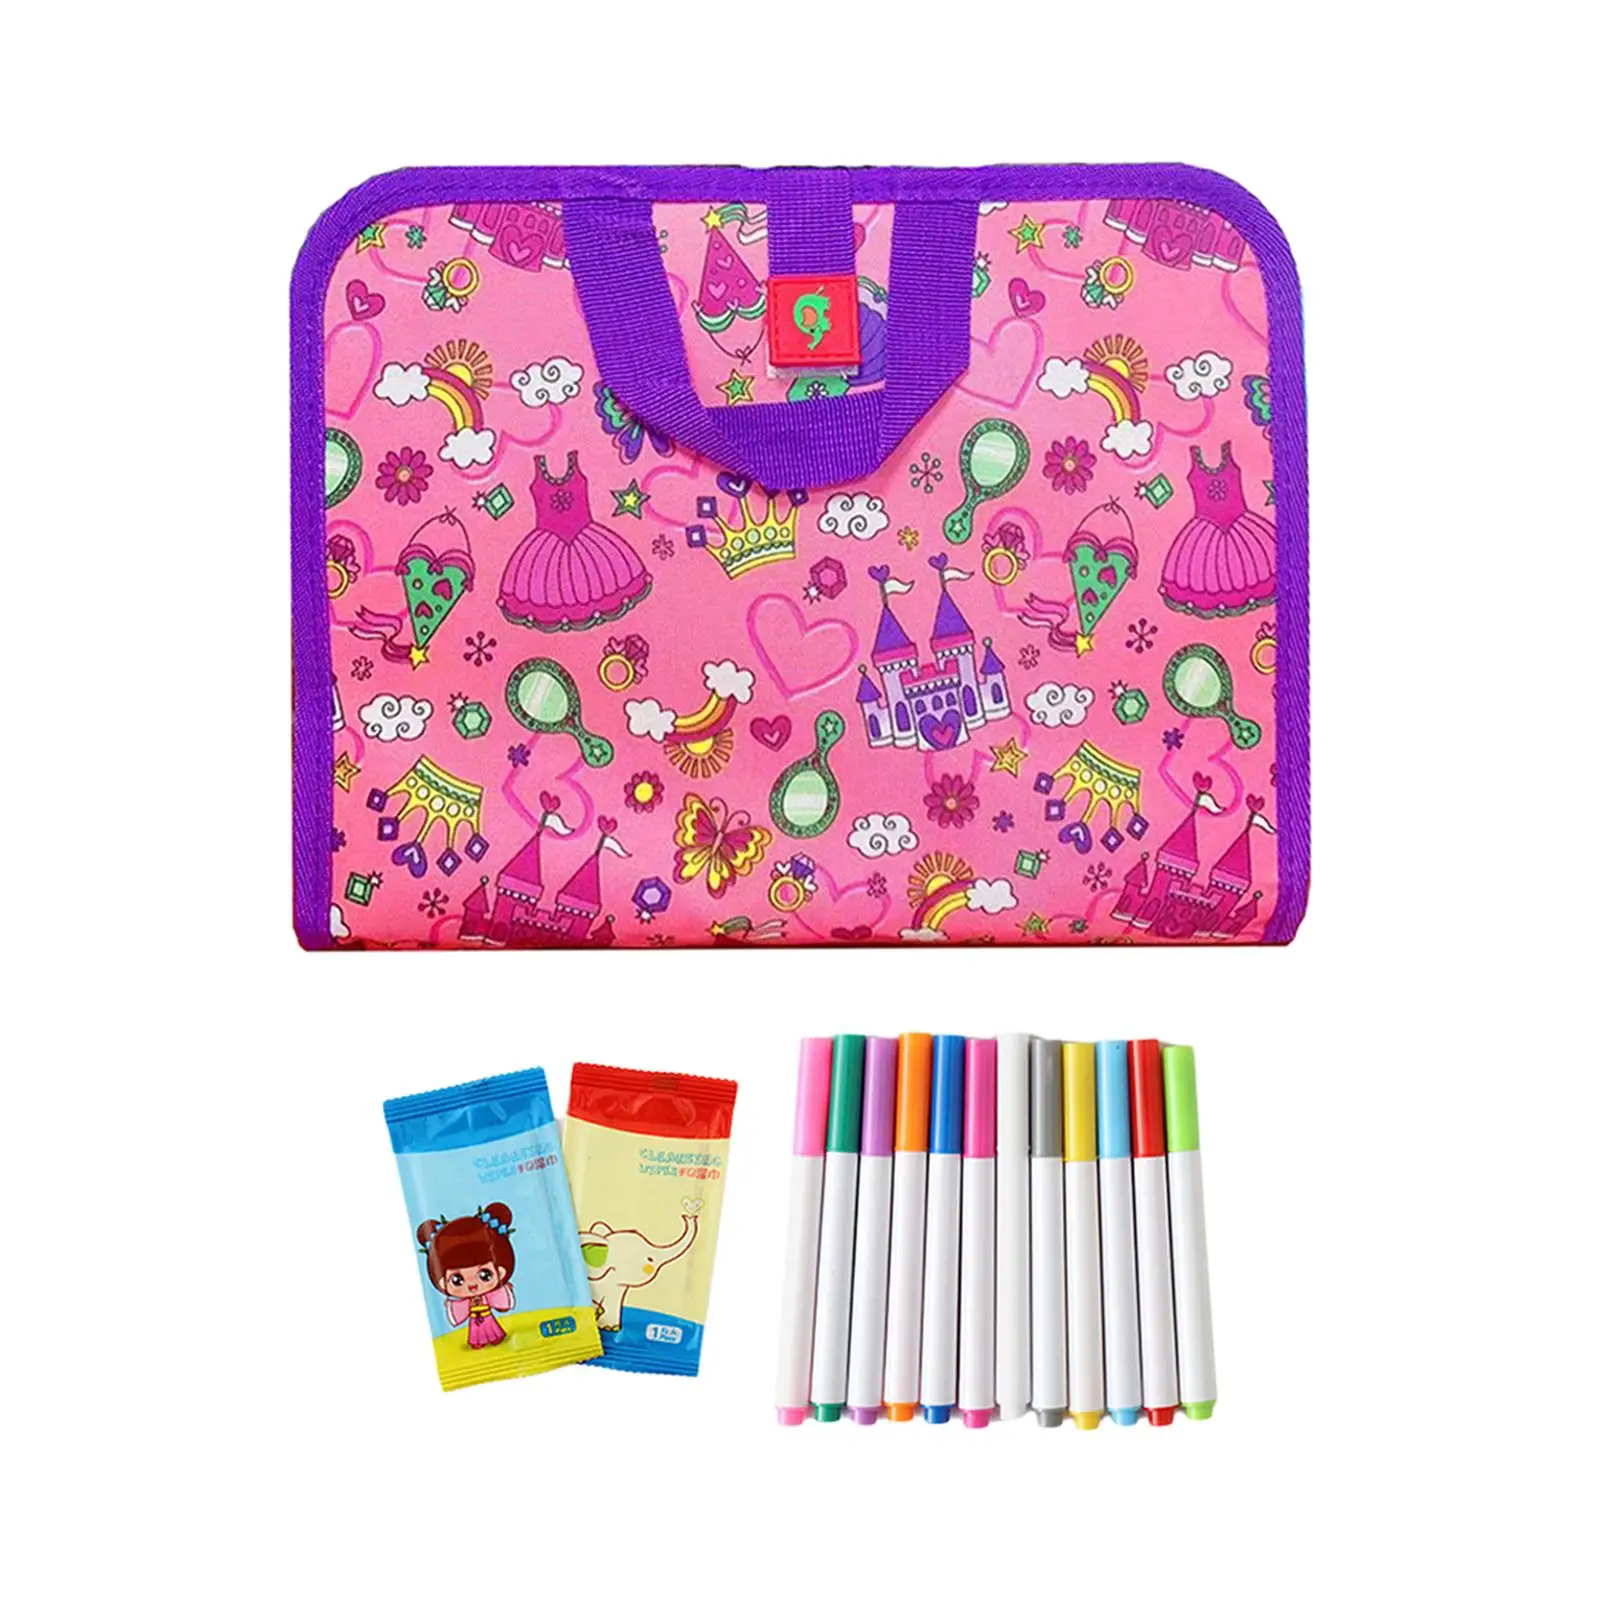 Erasable Book Doodle Set Painting Toys Xmas Gifts Road Trips Game Boys Girls Ages 3+ with 12 Watercolor Pens Reusable